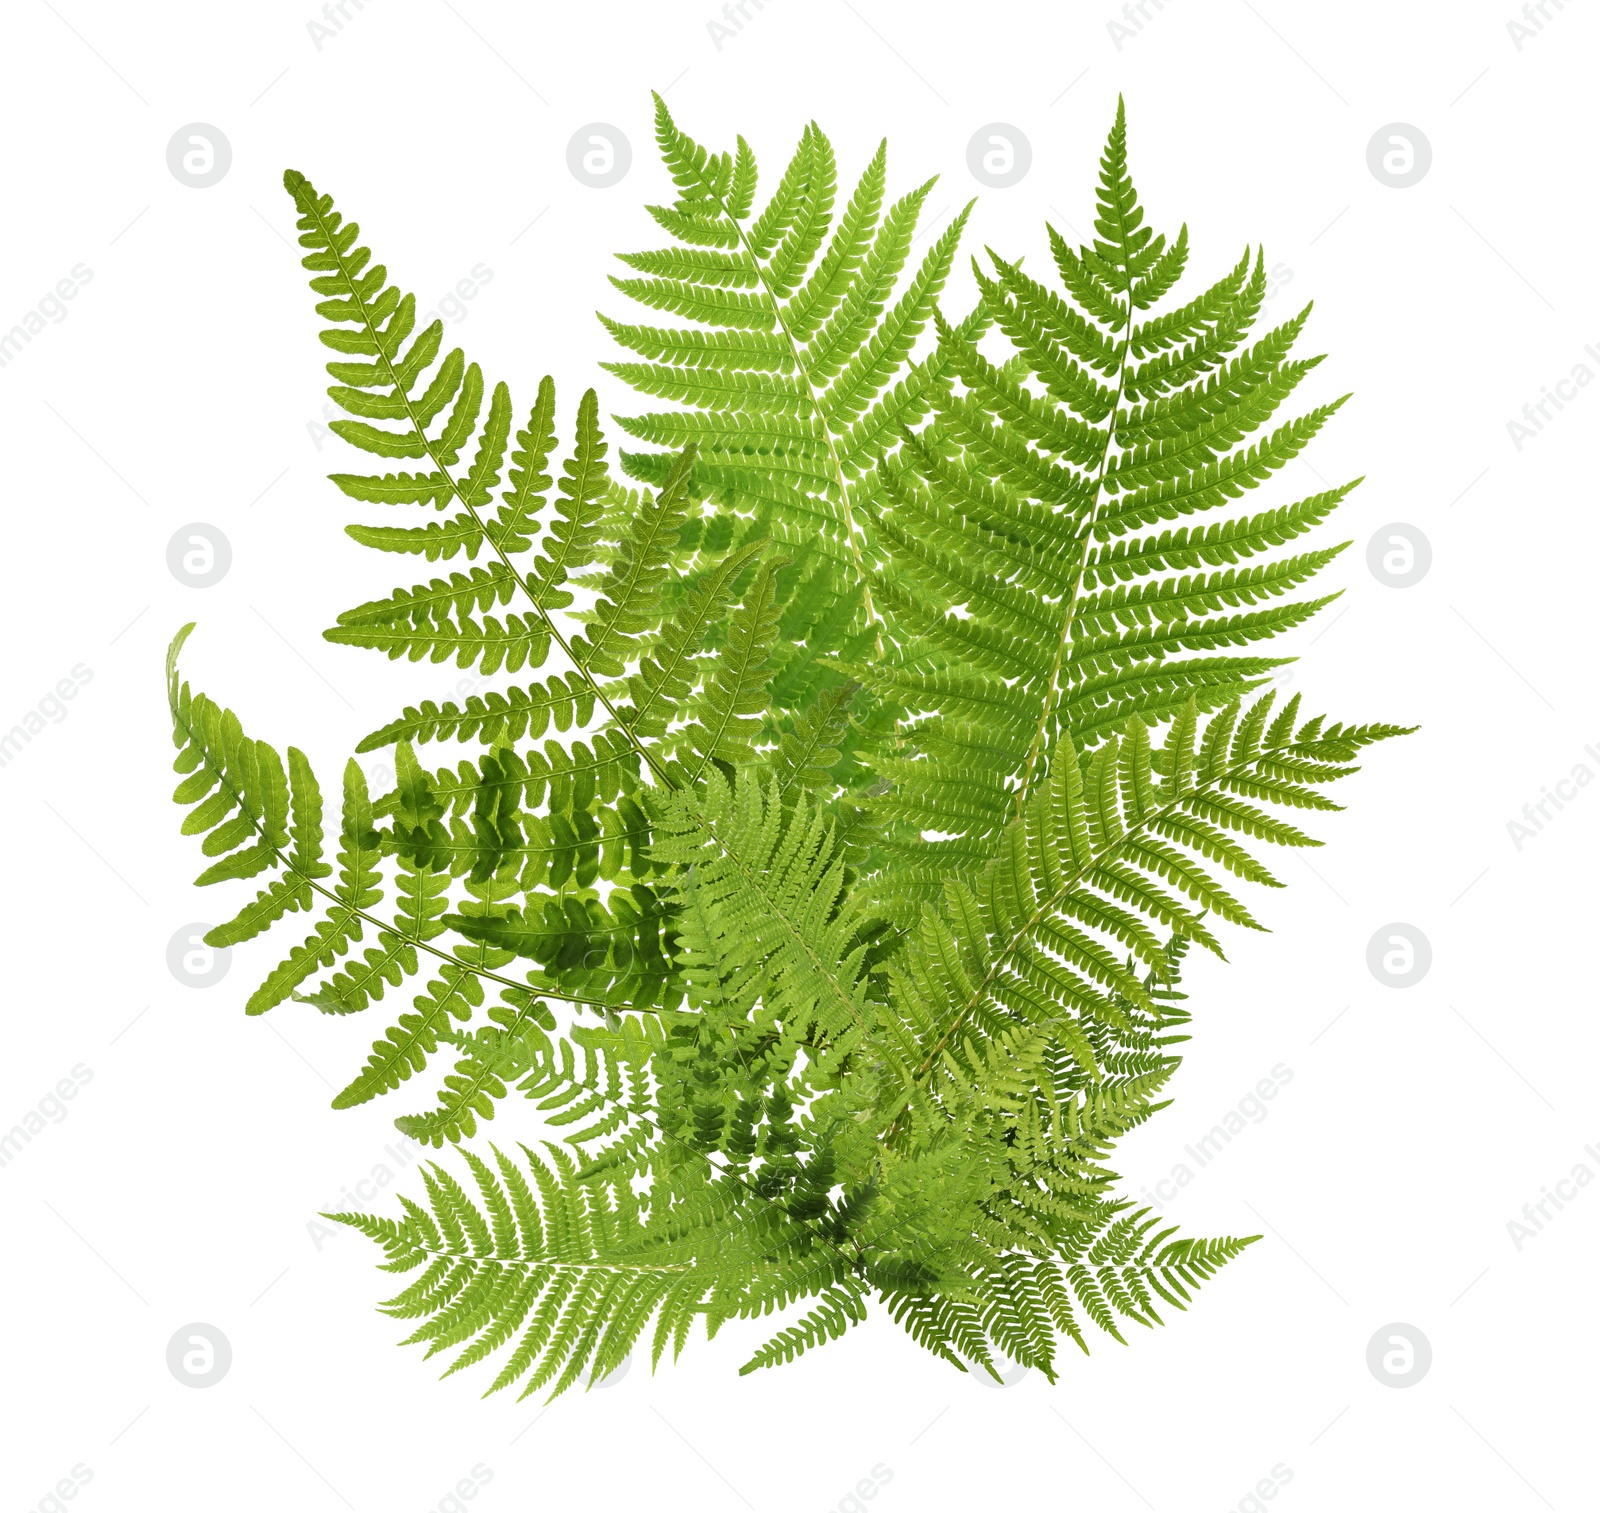 Image of Beautiful tropical fern leaves on white background